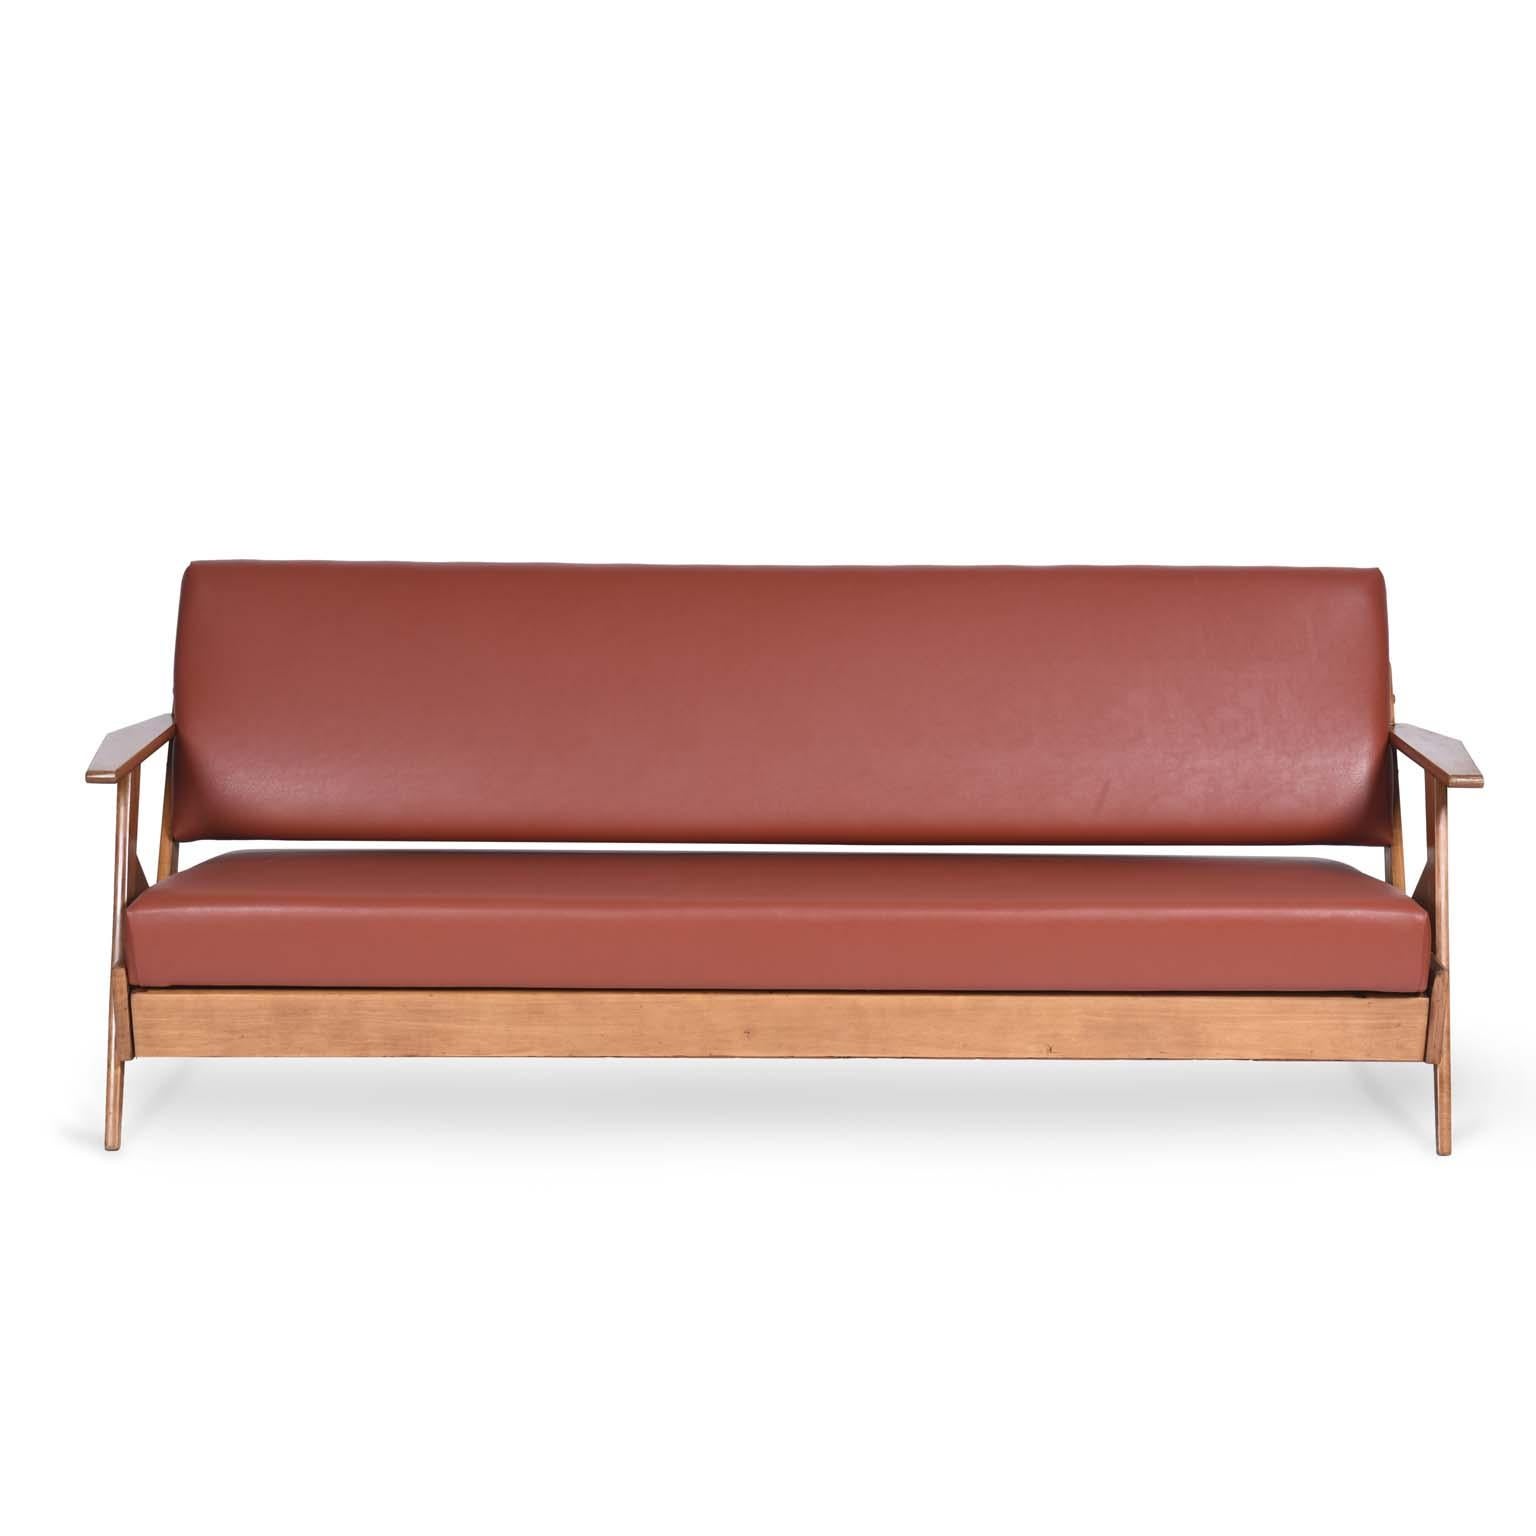 Zanine Caldas Midcentury Brazilian Sofa with Ivory Wood, 1958 In Good Condition For Sale In Sao Paulo, SP